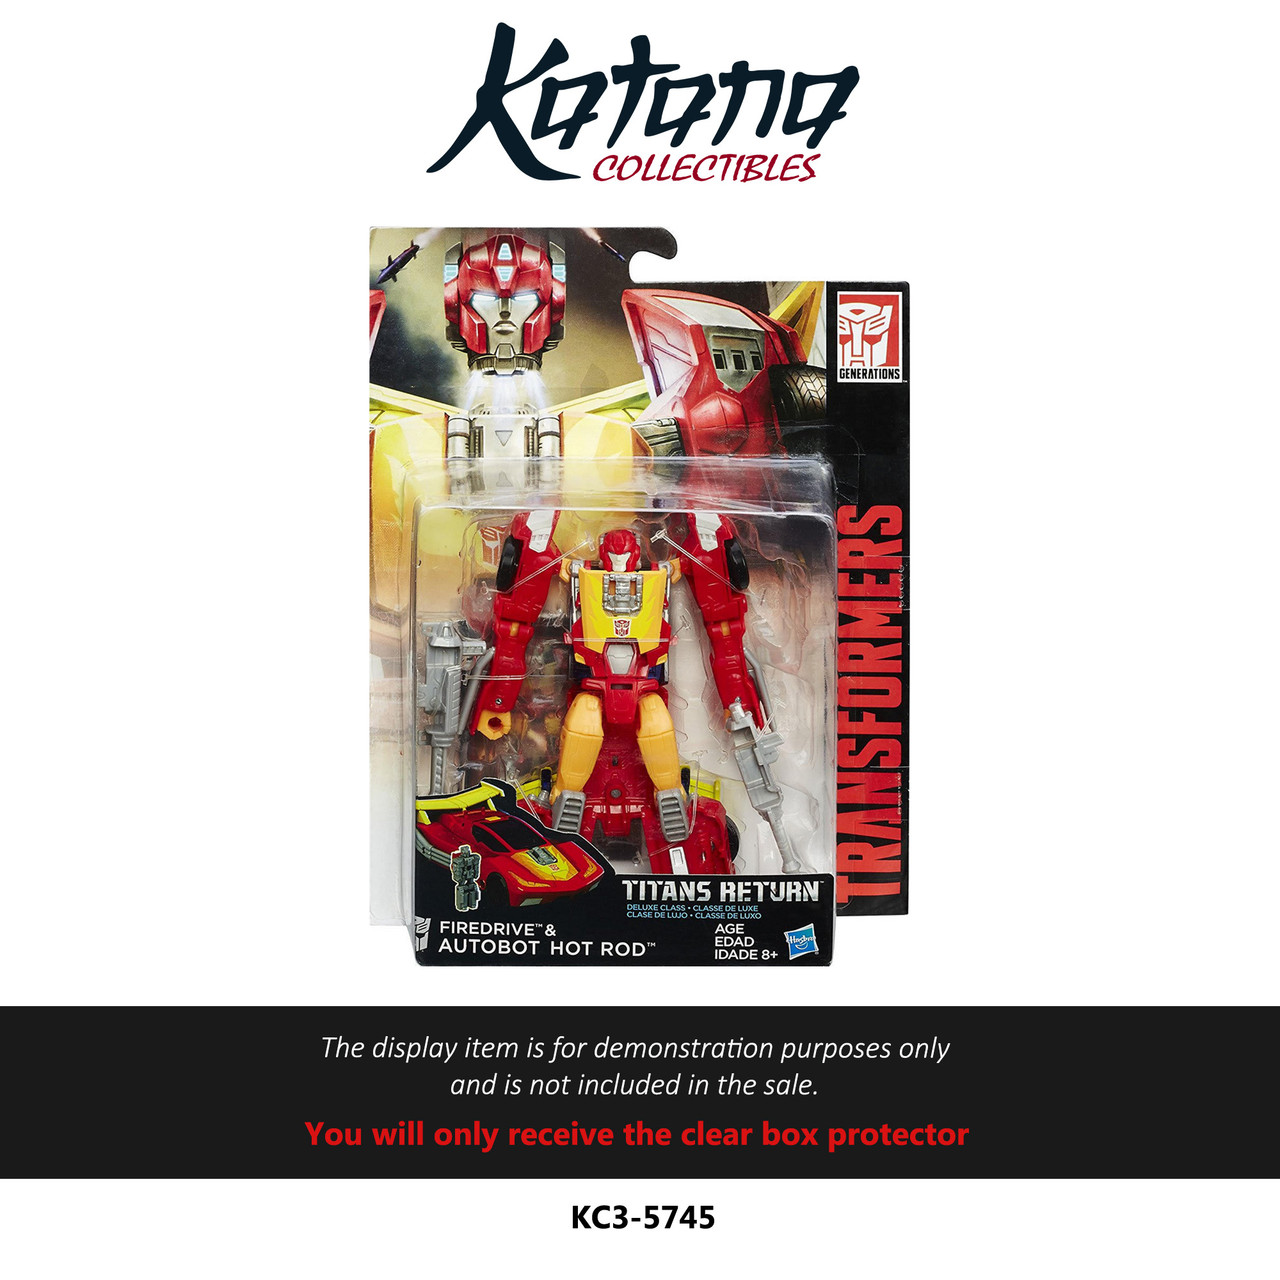 Katana Collectibles Protector For Transformers Titans Return Firedrive & Autobot Hot Rod